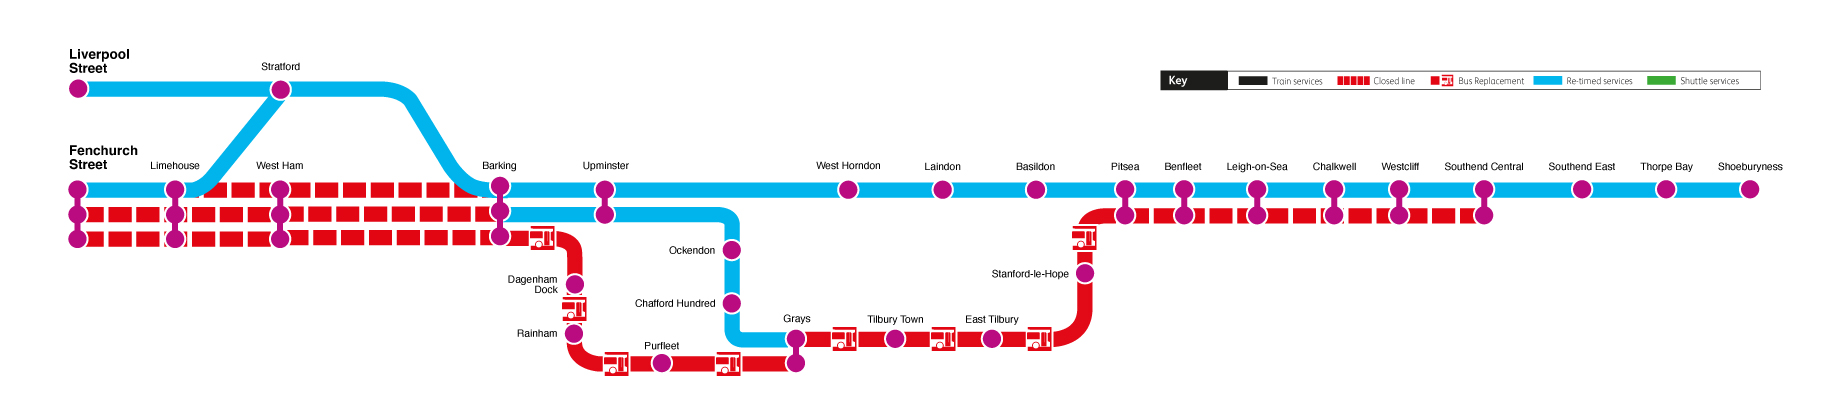 Service Alterations Map